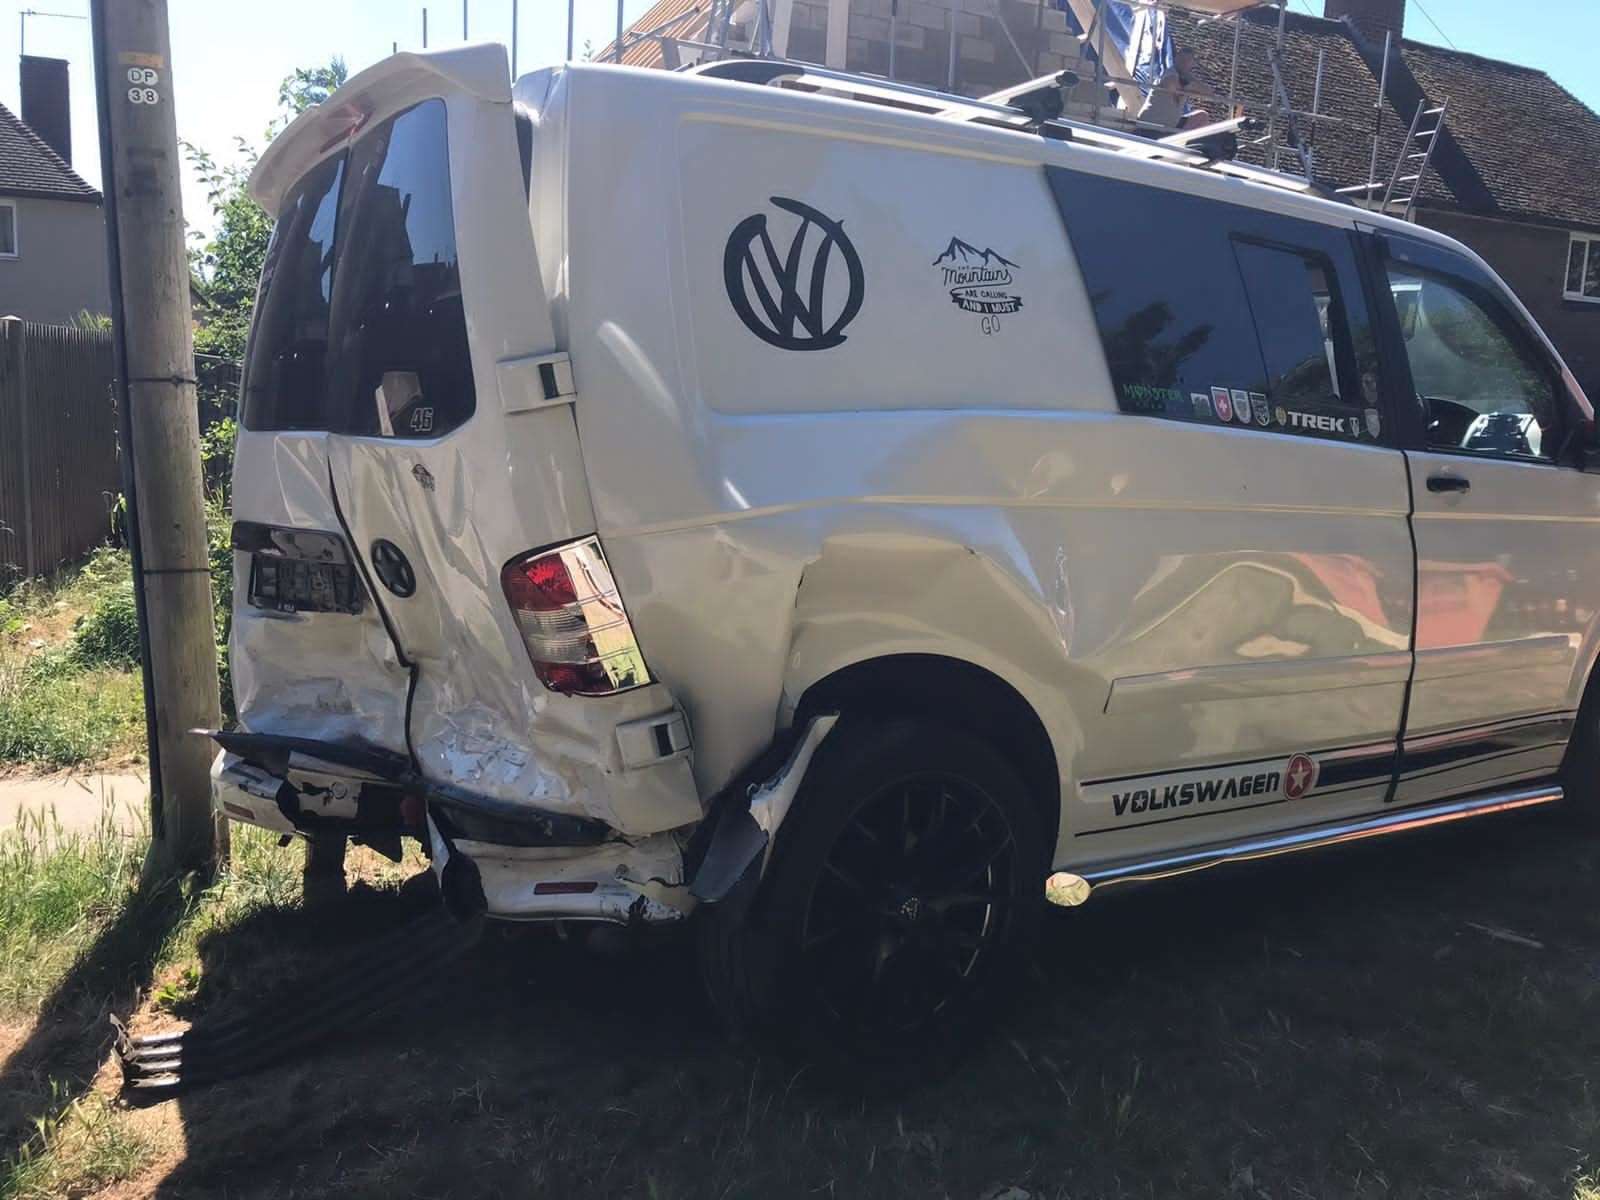 In 2018, a van was written off after a crash in Eyhorne Street, the same place as the recent minibus crash